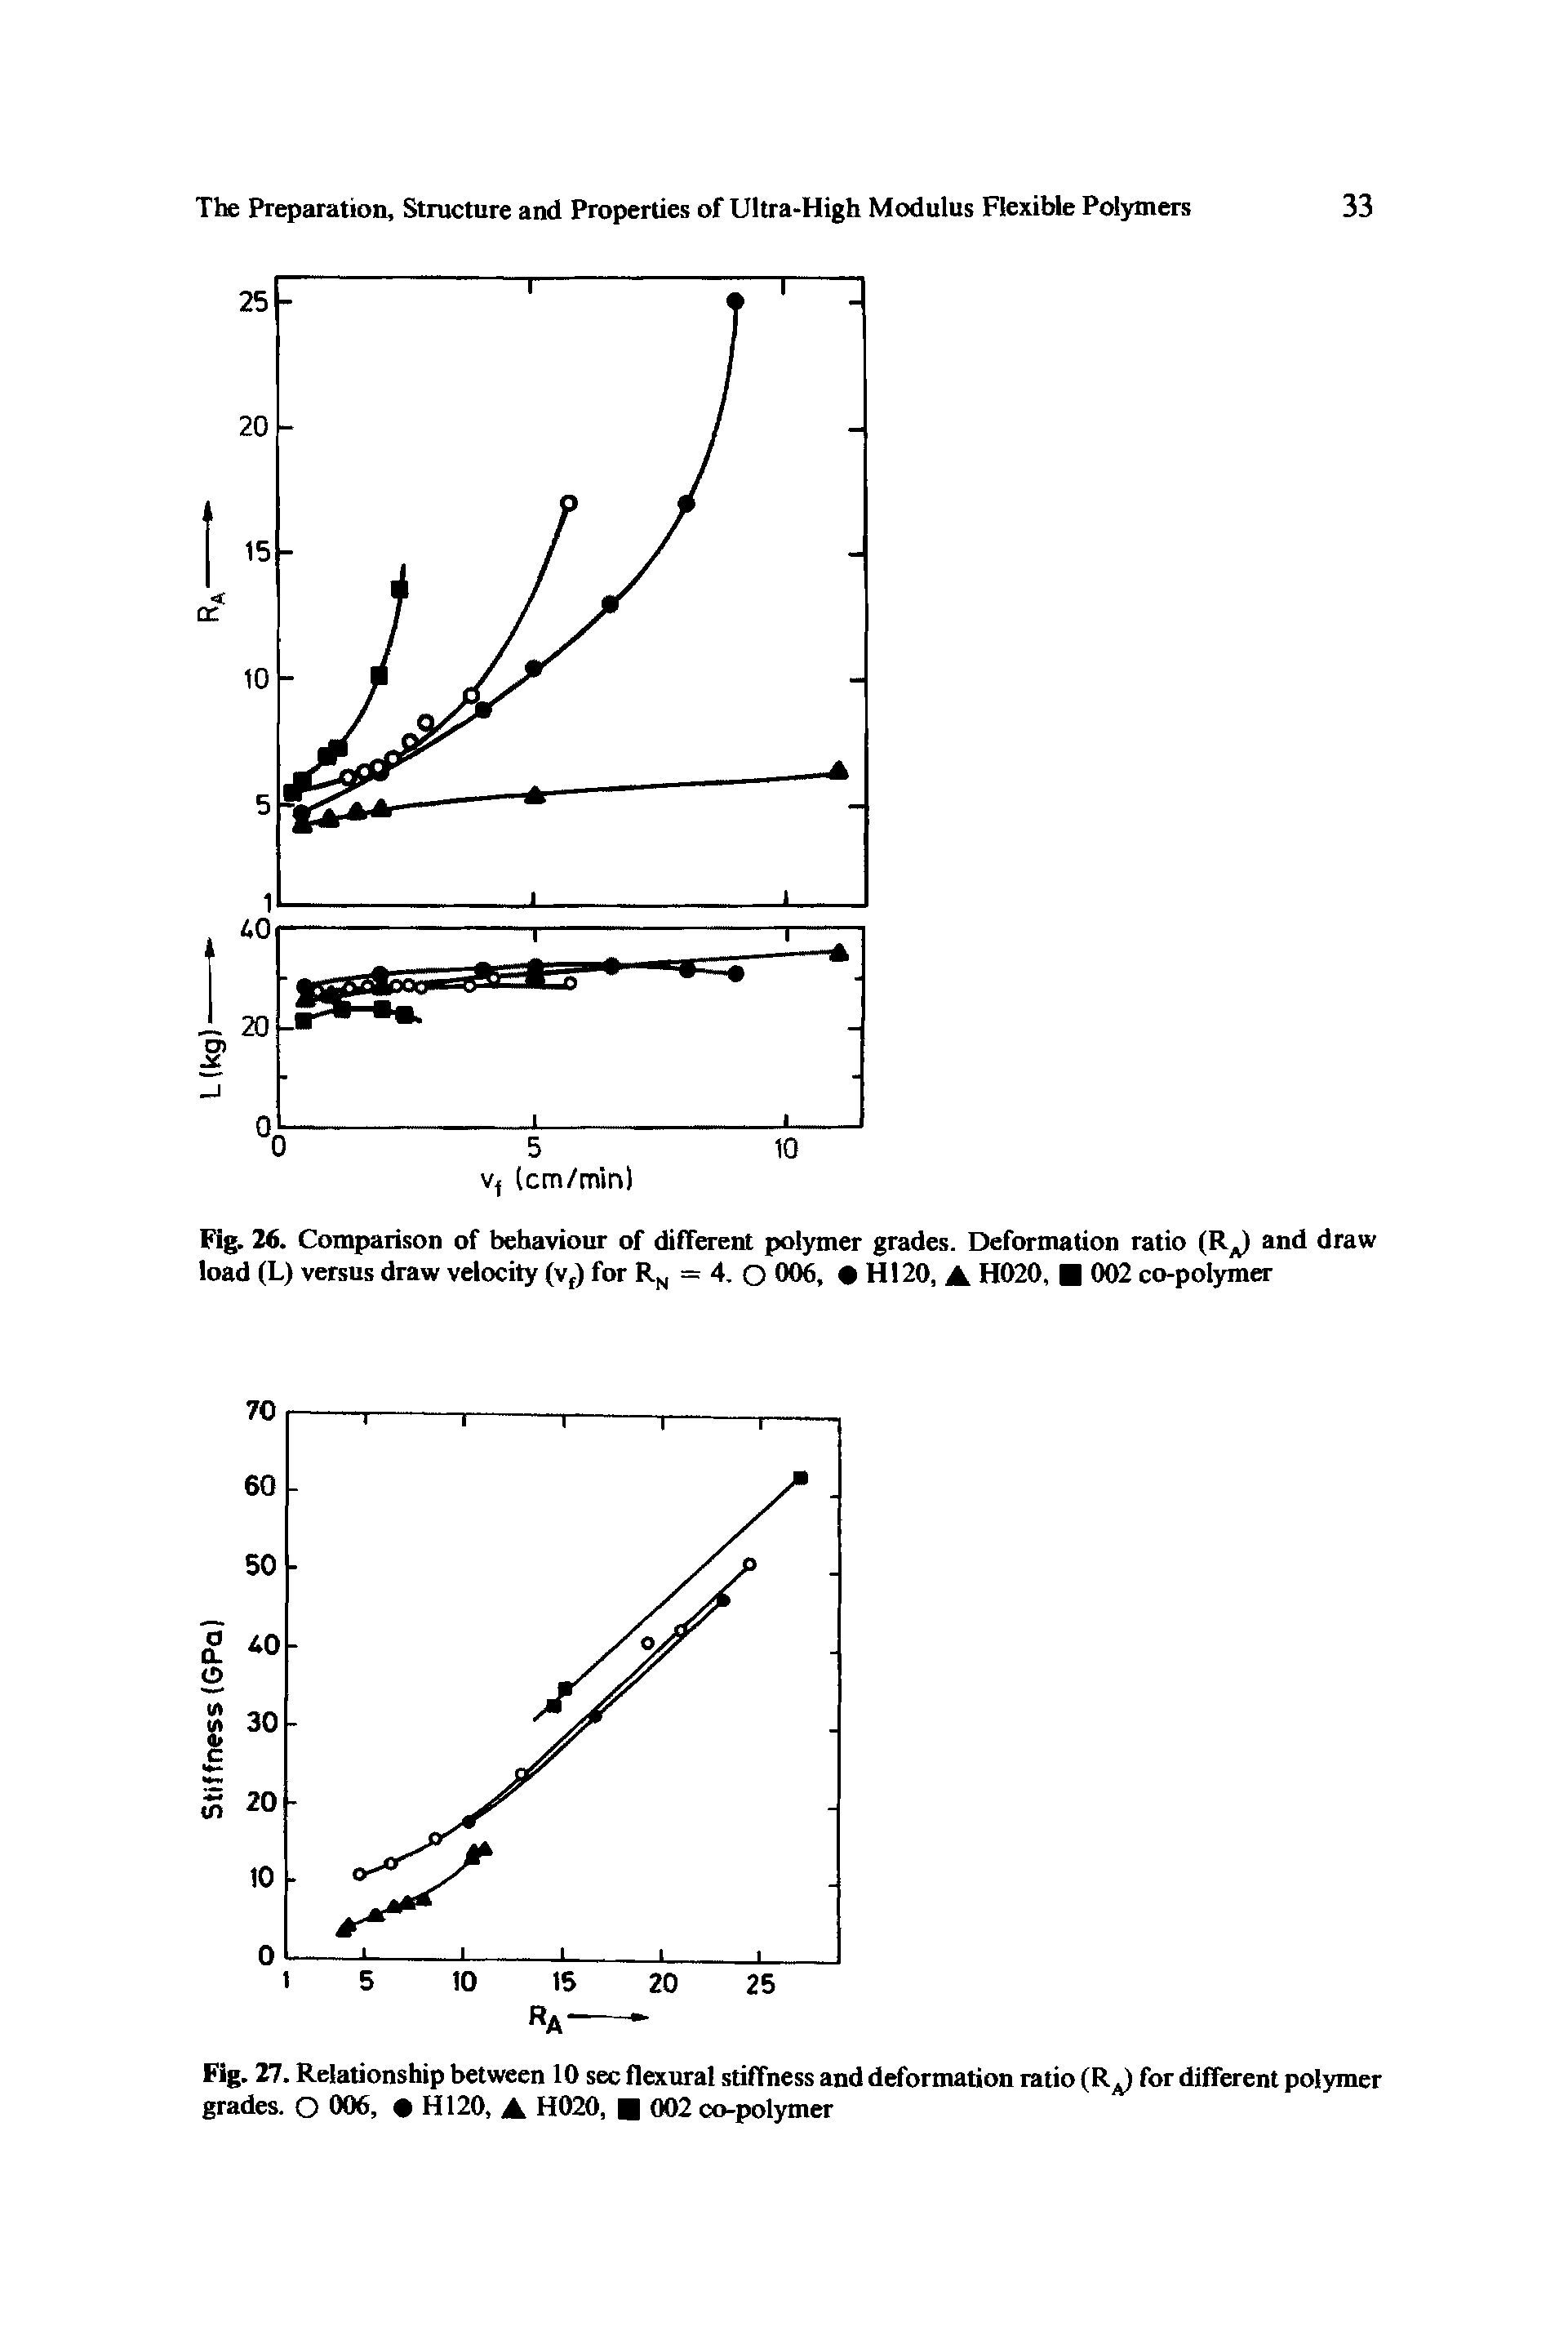 Fig. 27. Relationship between 10 sec flexural stiffness and deformation ratio (R, for different polymer grades. O 006, H120, A H020, 002 co-polymer...